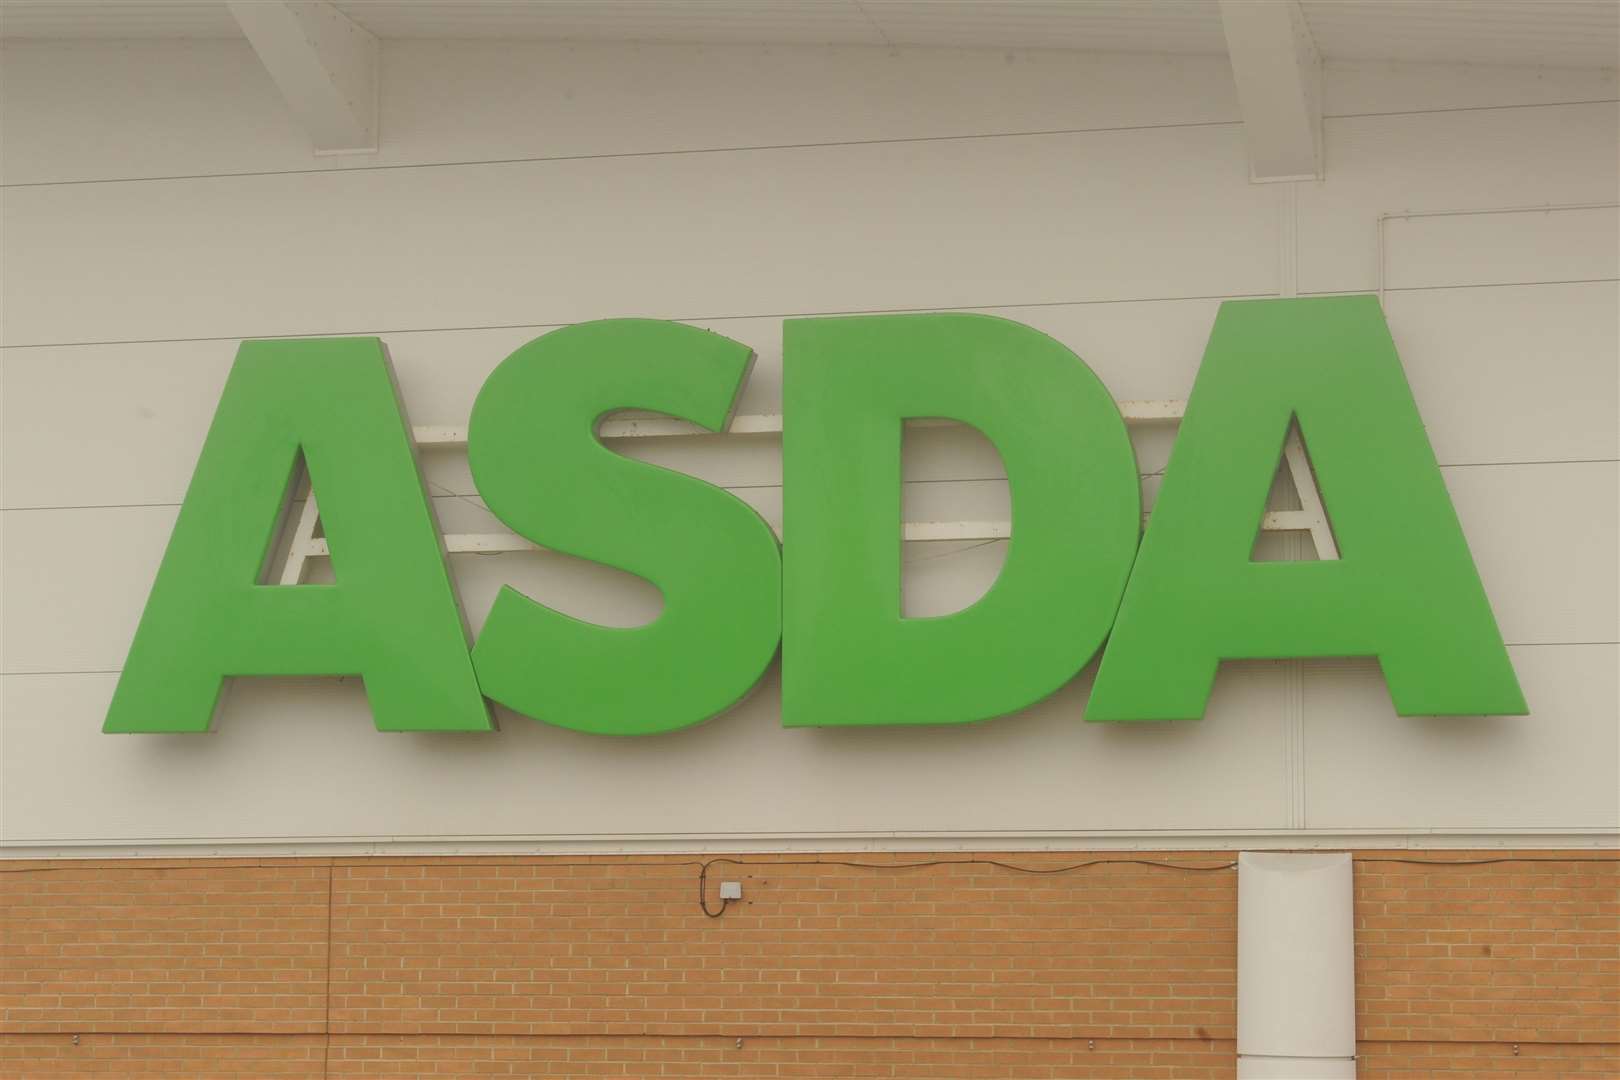 Some Asda products are limited to three per person